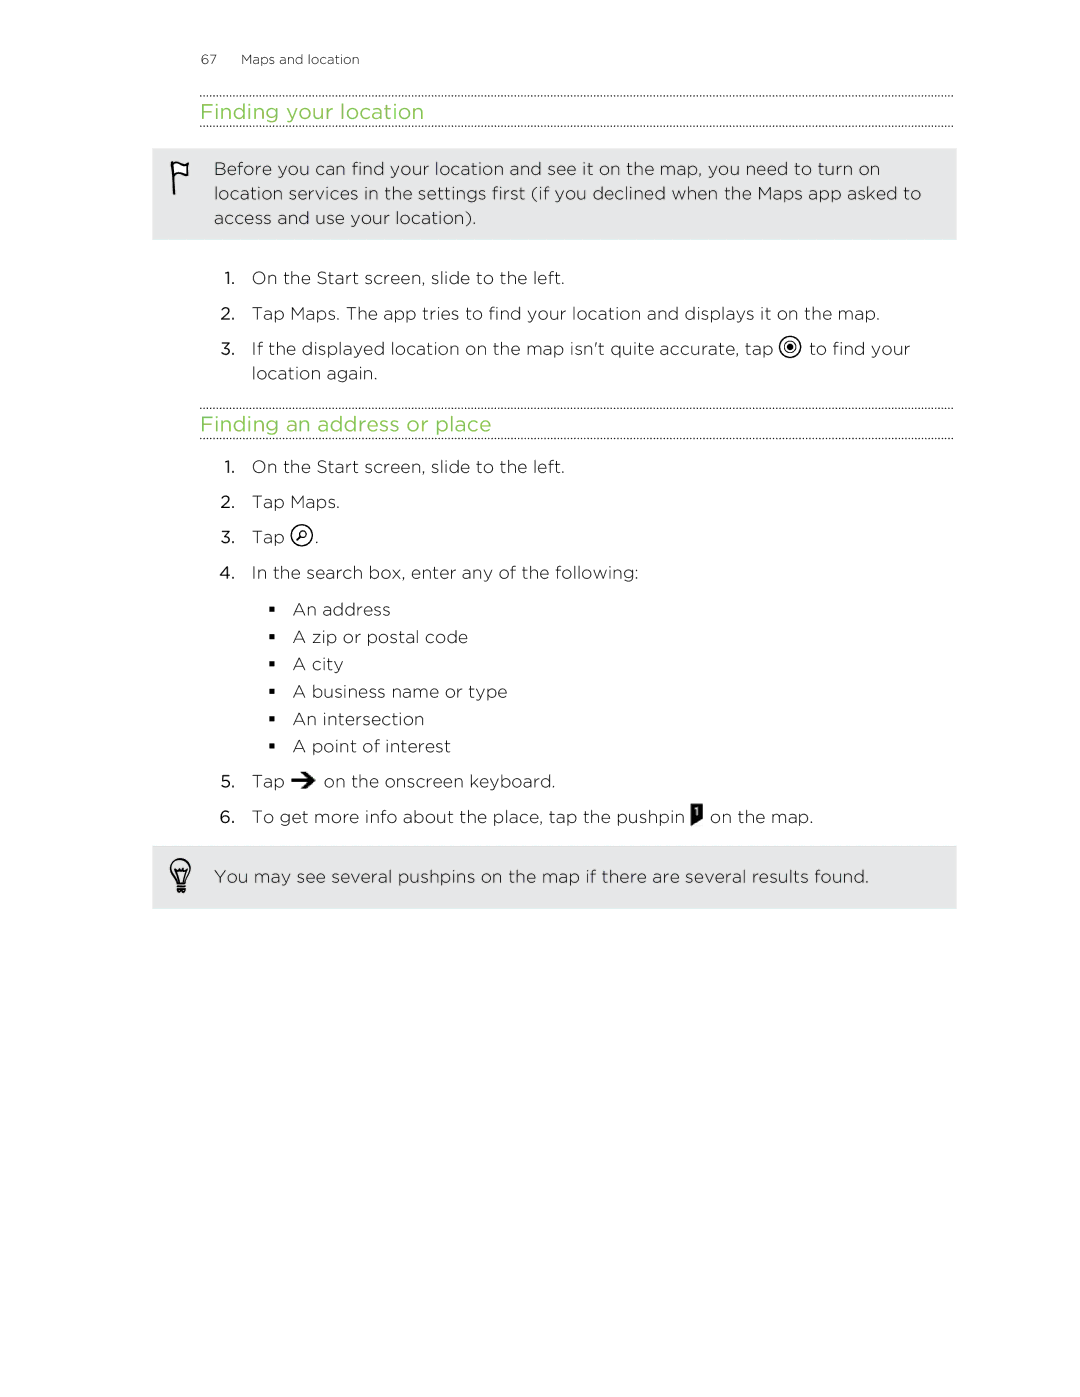 HTC 8X manual Finding your location, Finding an address or place 